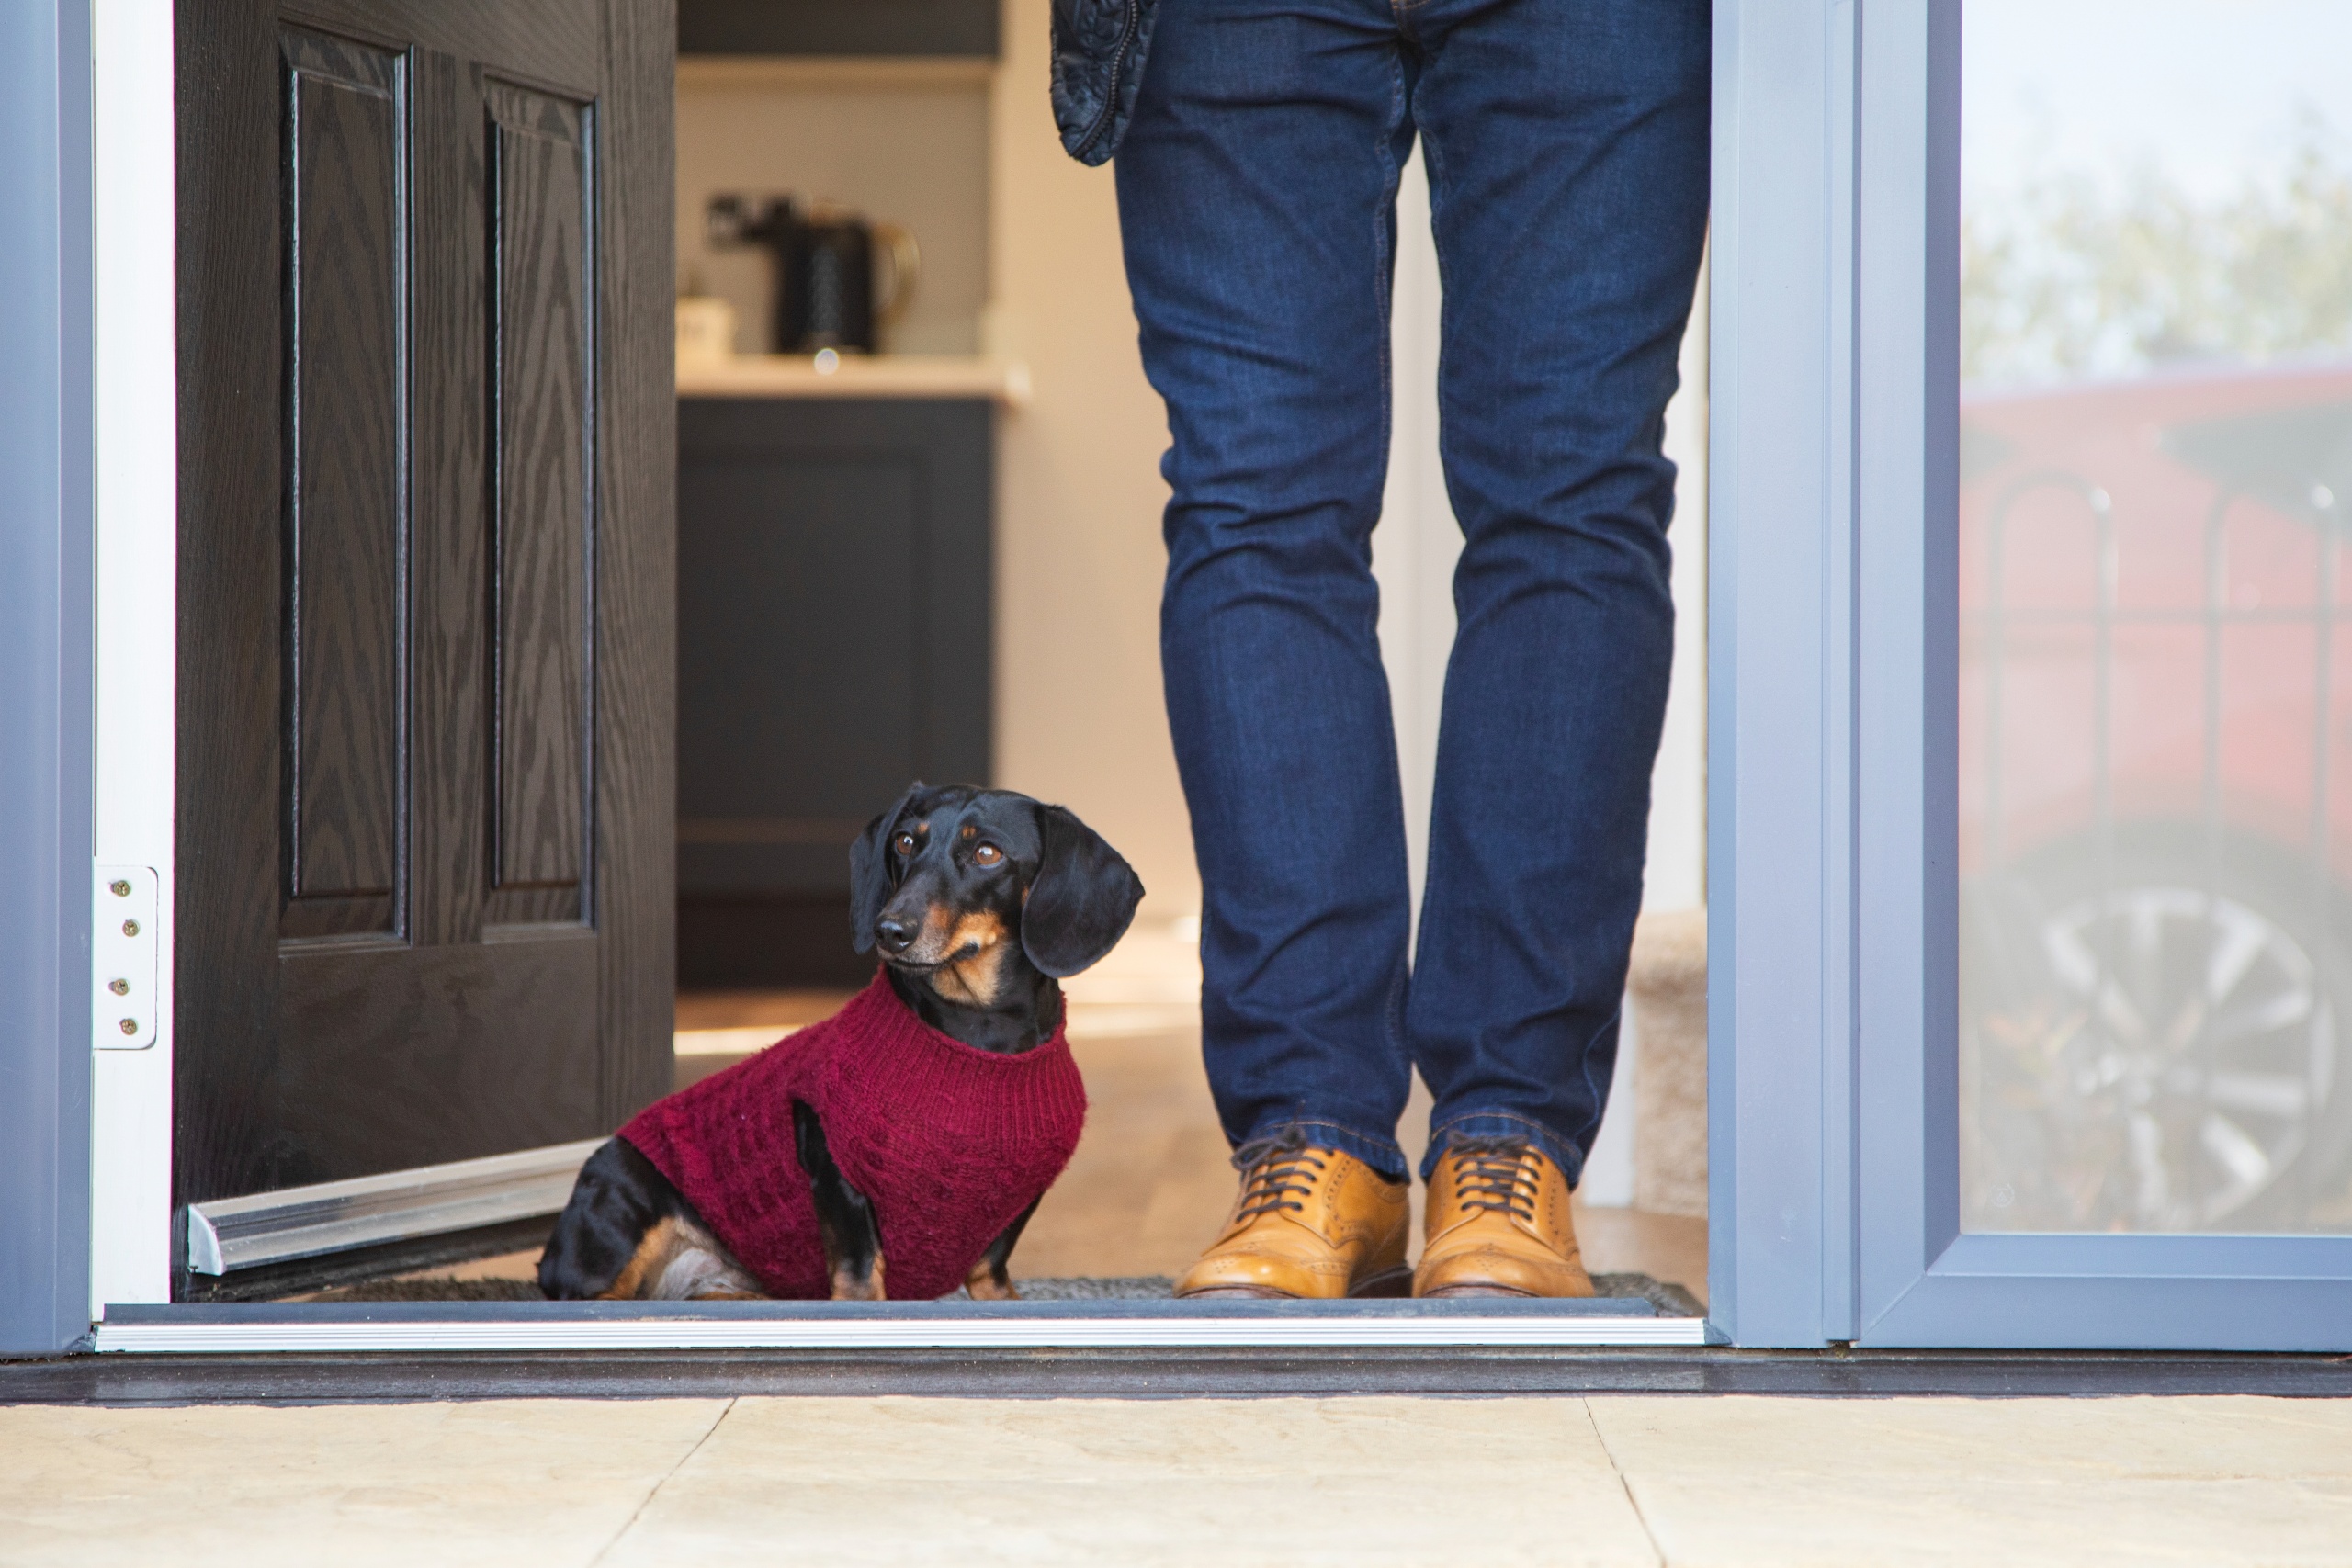 A sausage dog stood in a doorway next to his owners feet